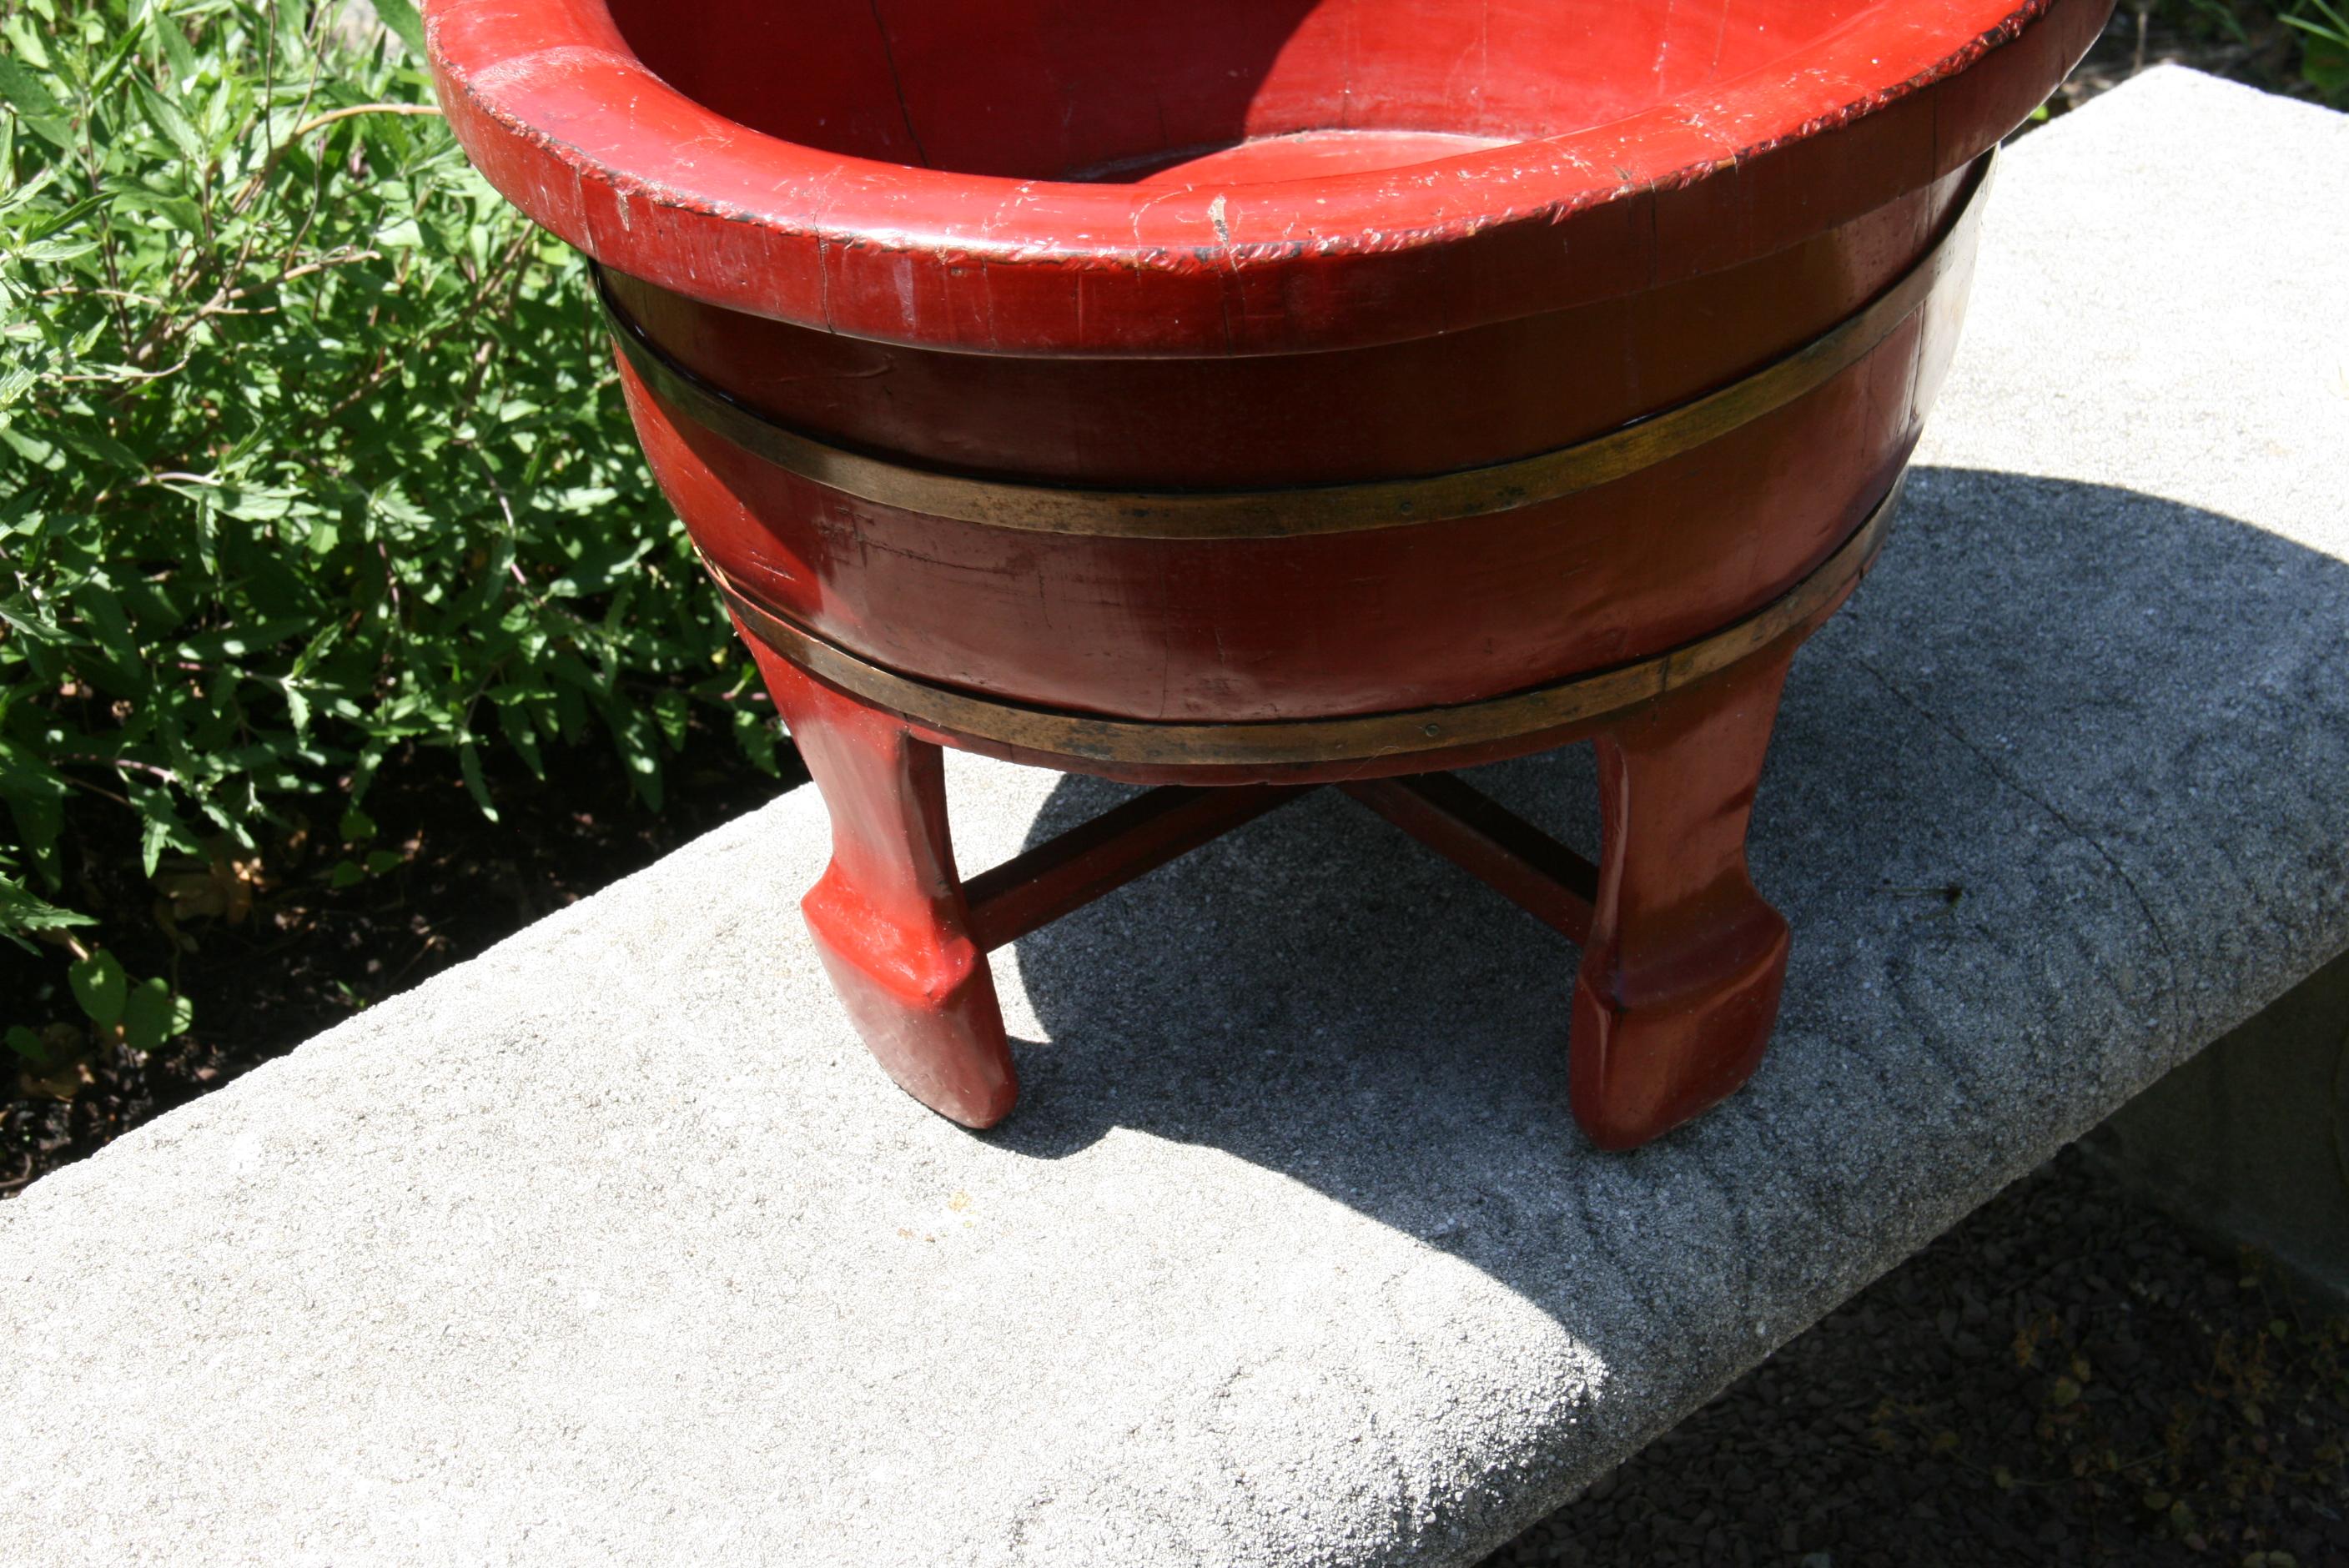 Mid-20th Century Japanese Red Painted Wood Barrel Planter Bowl on Stand For Sale